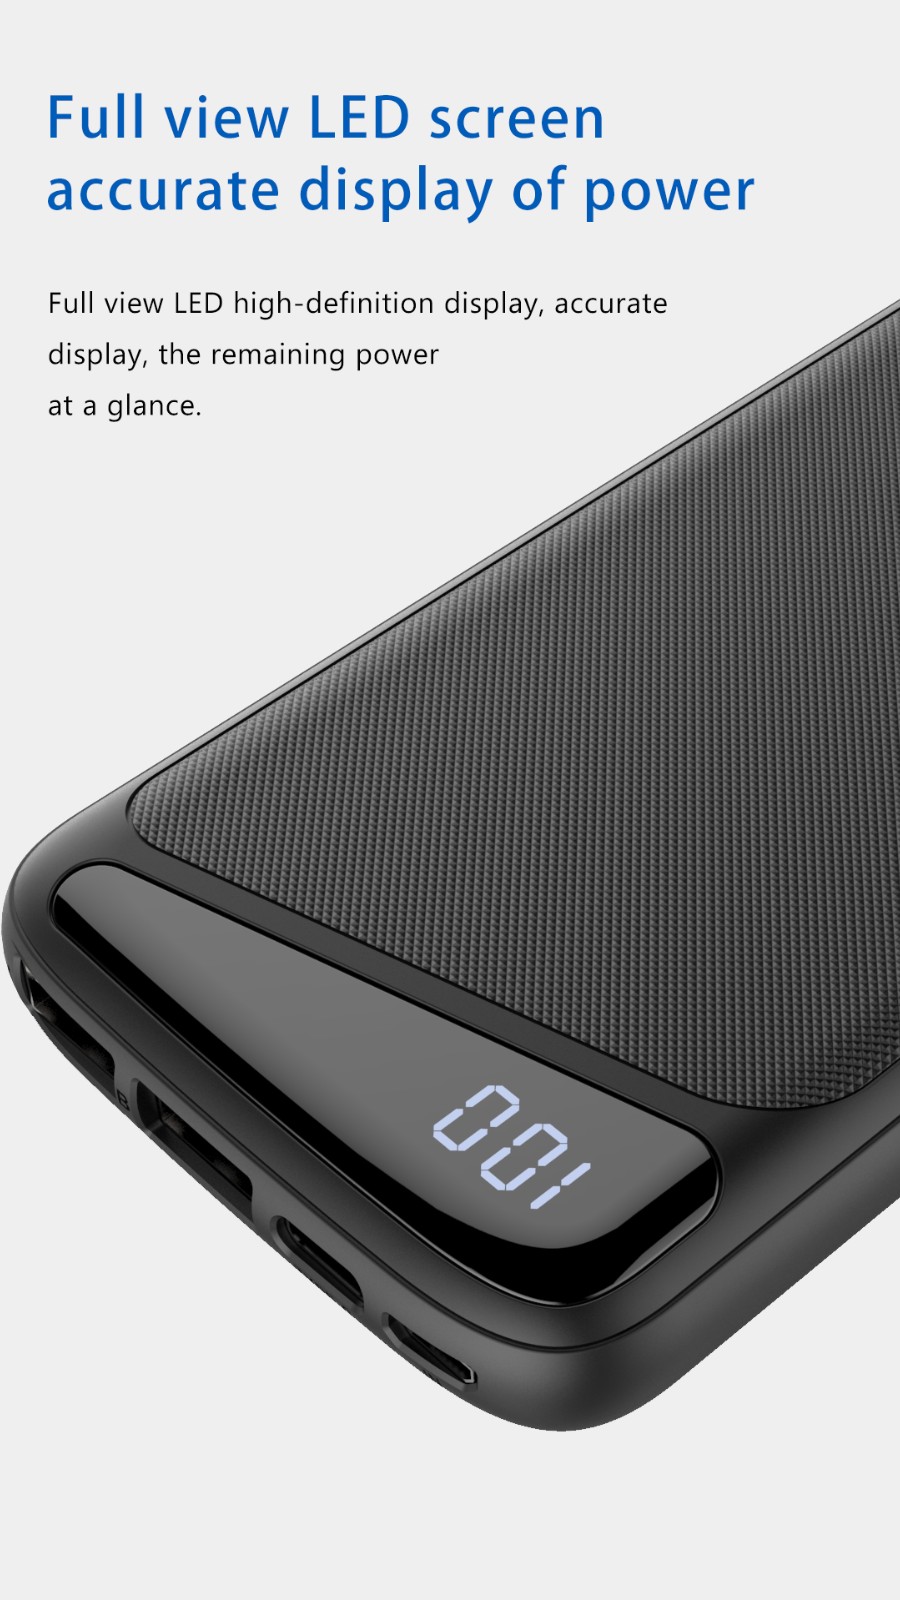 VPX HB110D · 22.5W FAST CHARGING POWER BANK